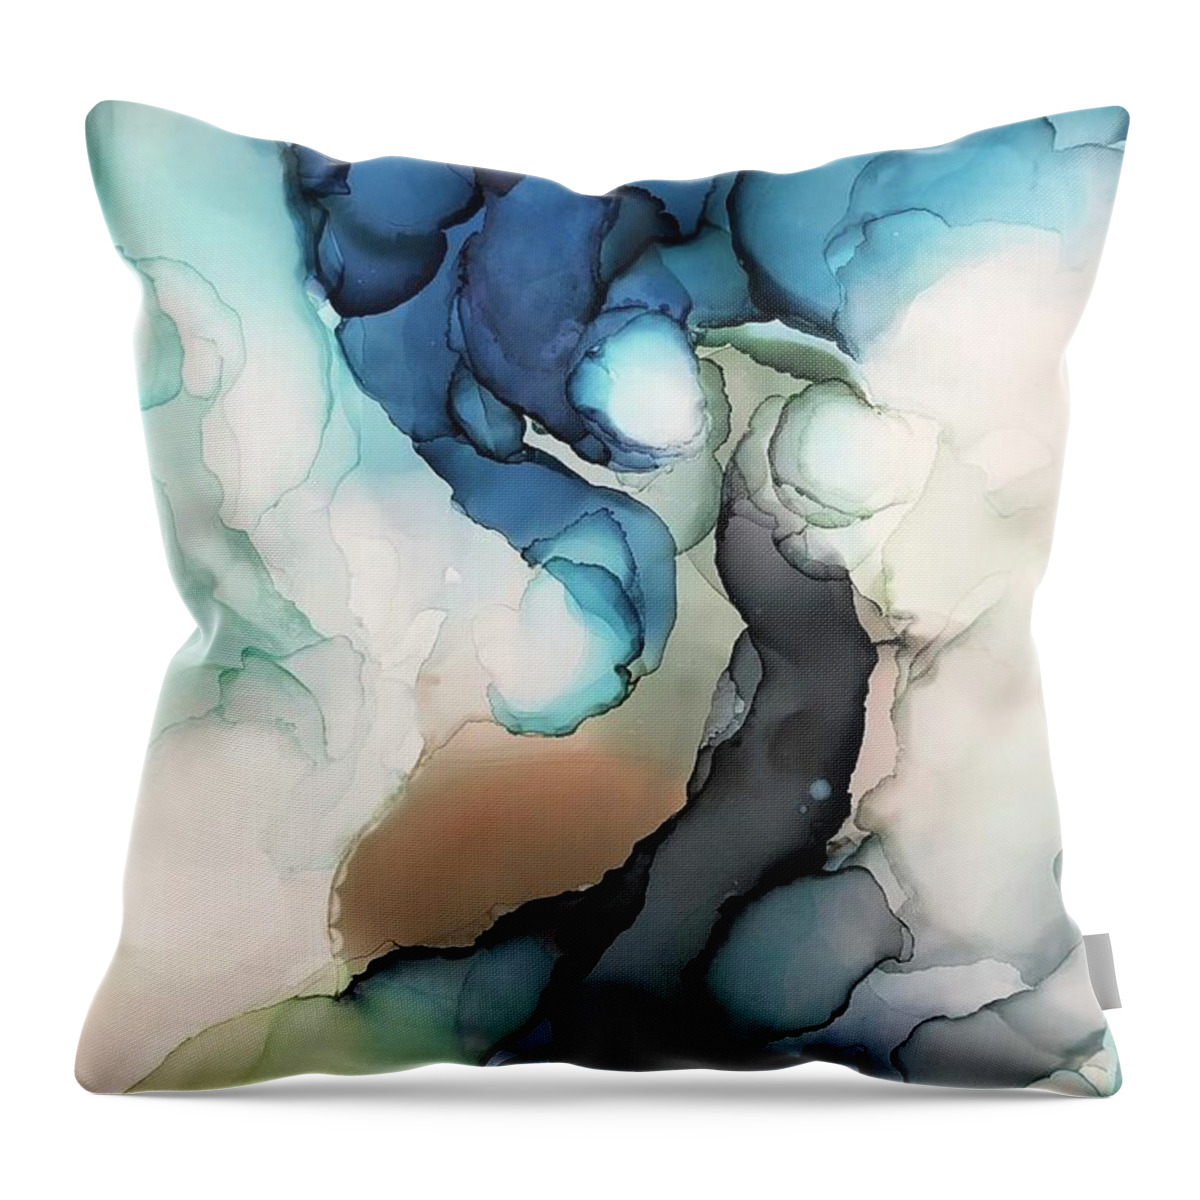 Abstract Throw Pillow featuring the painting Parting ways by Eric Fischer